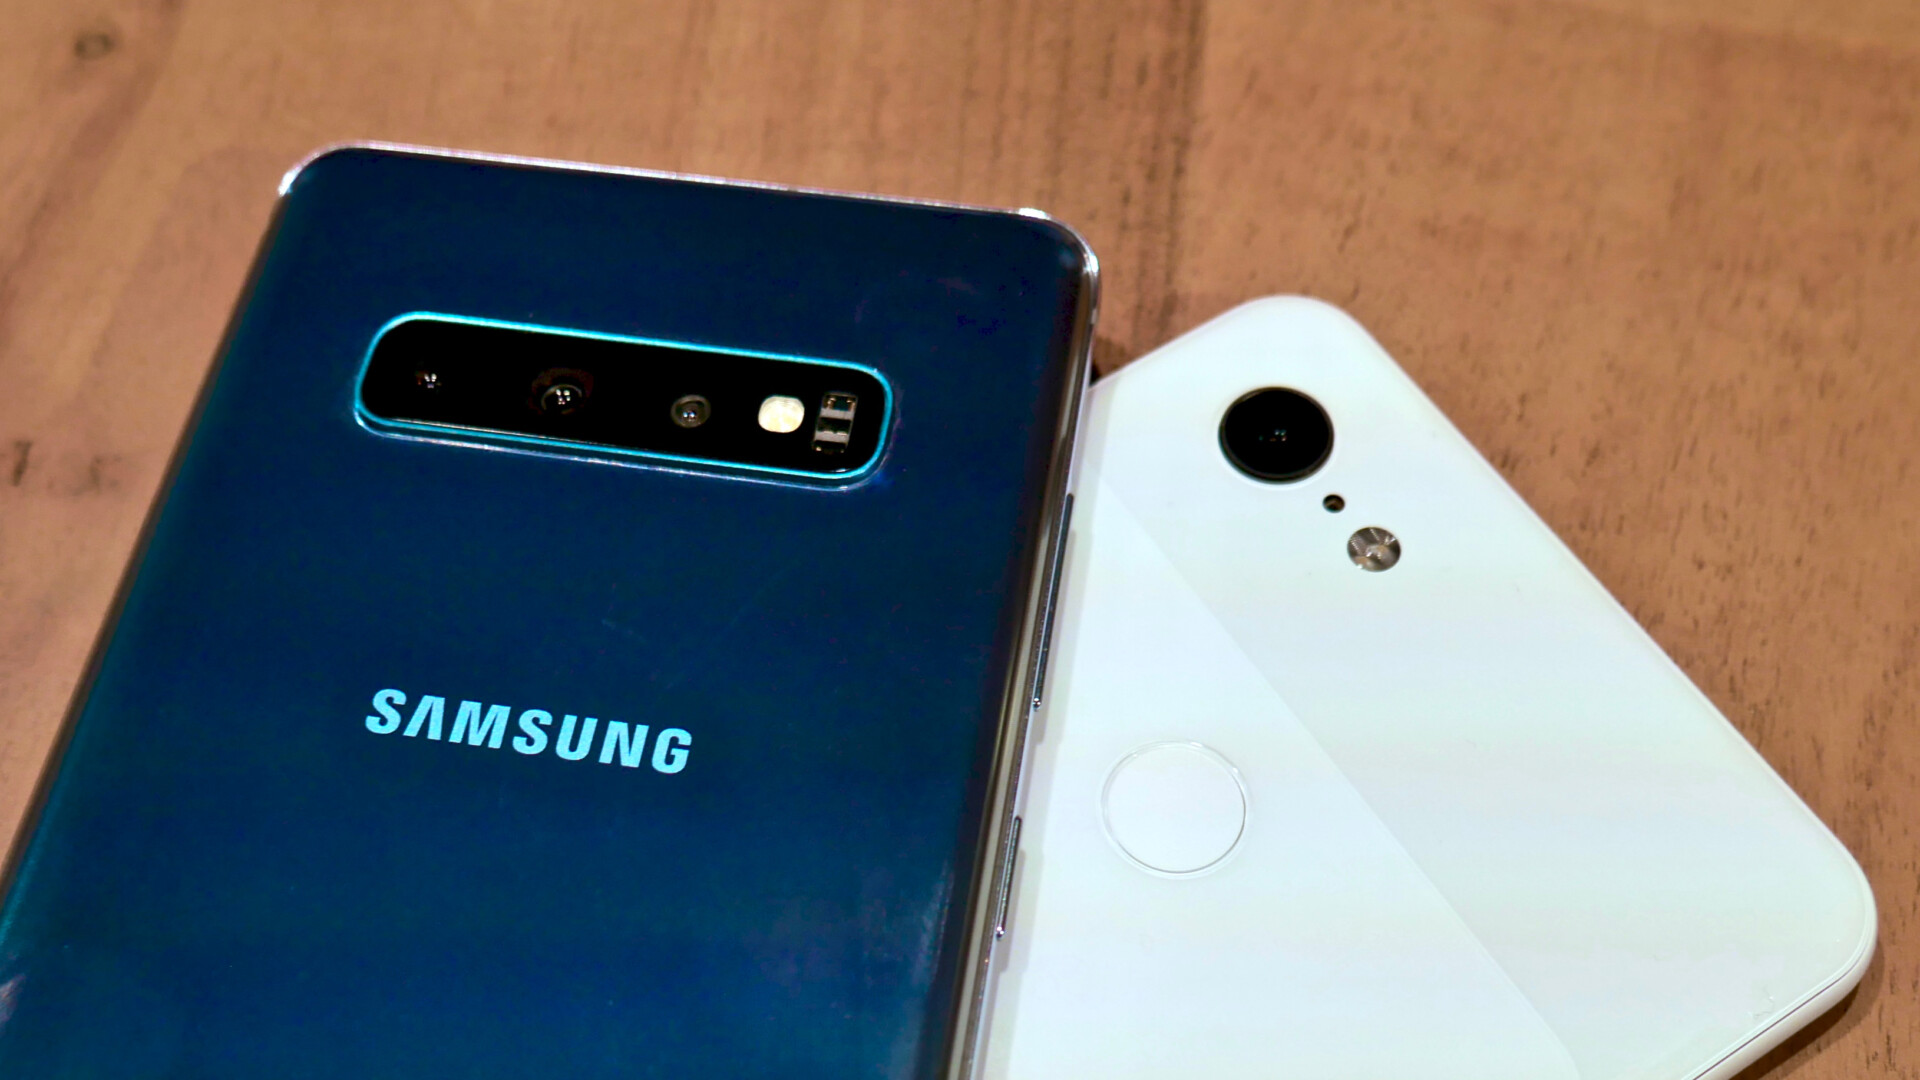 Photo of the backside of the Samsung Galaxy S10 Plus next to a Google Pixel 3 XL displaying the cameras